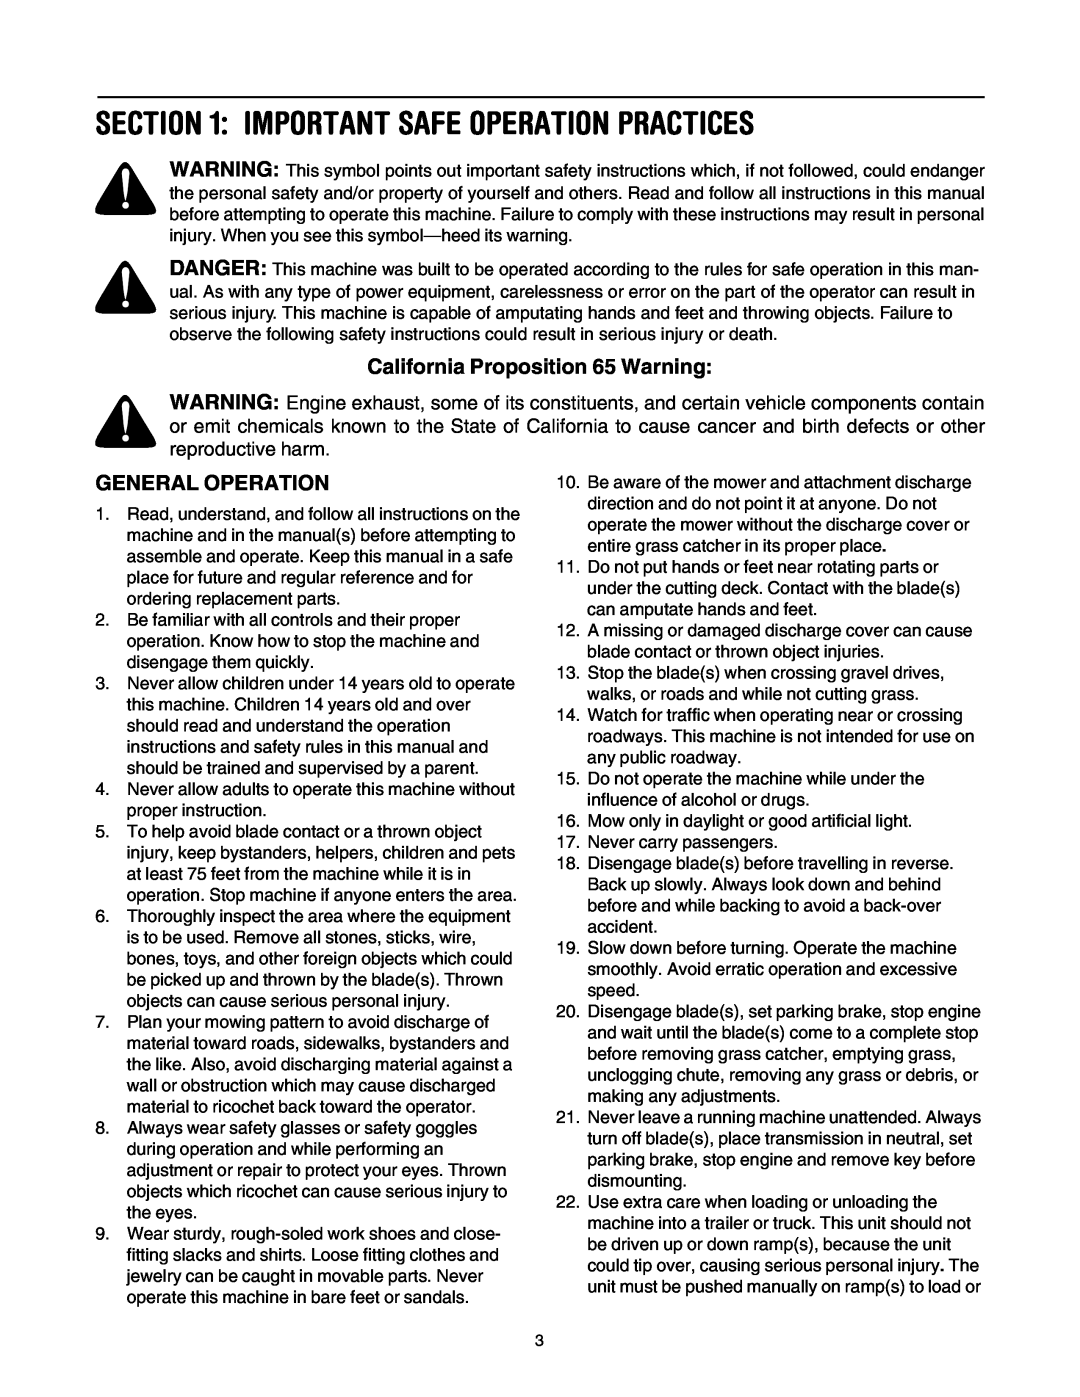 Bolens LT1024 manual Important Safe Operation Practices, California Proposition 65 Warning, General Operation 